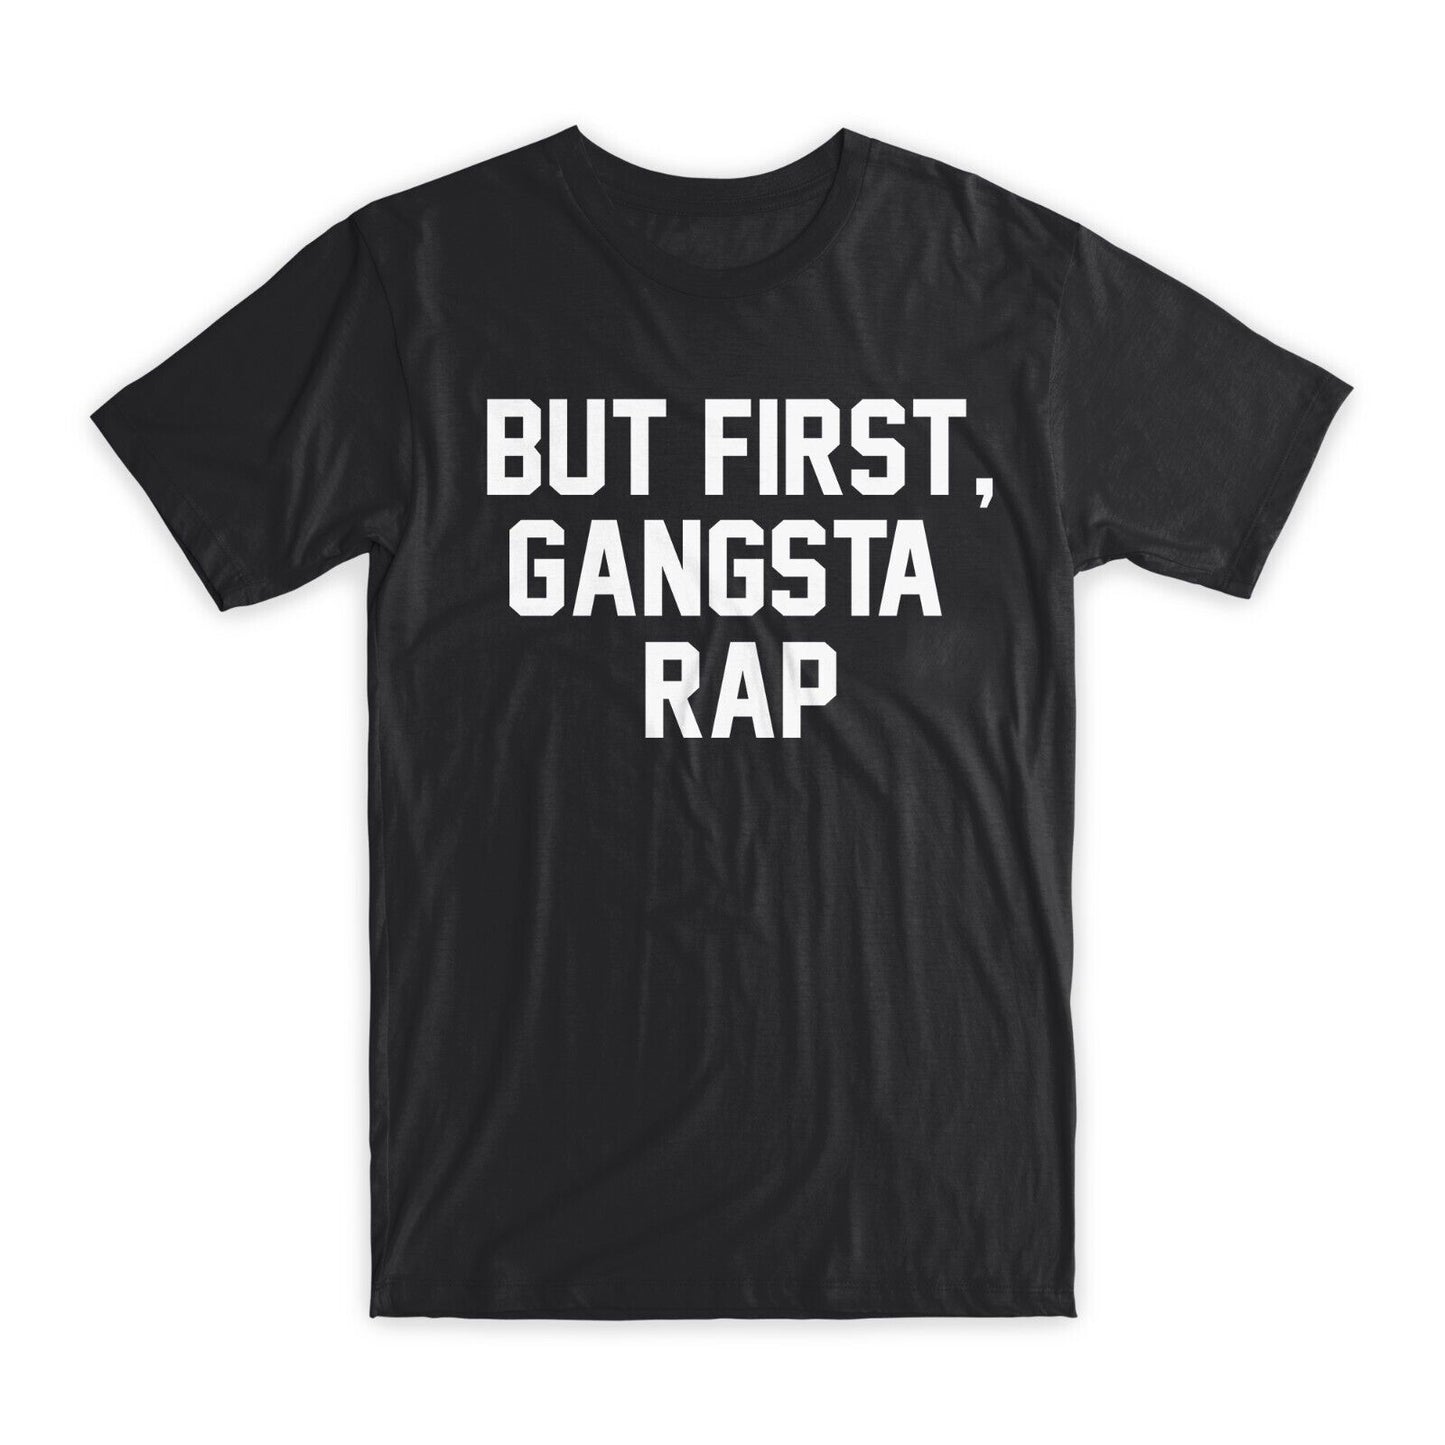 But First, Gangsta Rap T-Shirt Premium Soft Cotton Crew Neck Funny Tee Gifts NEW